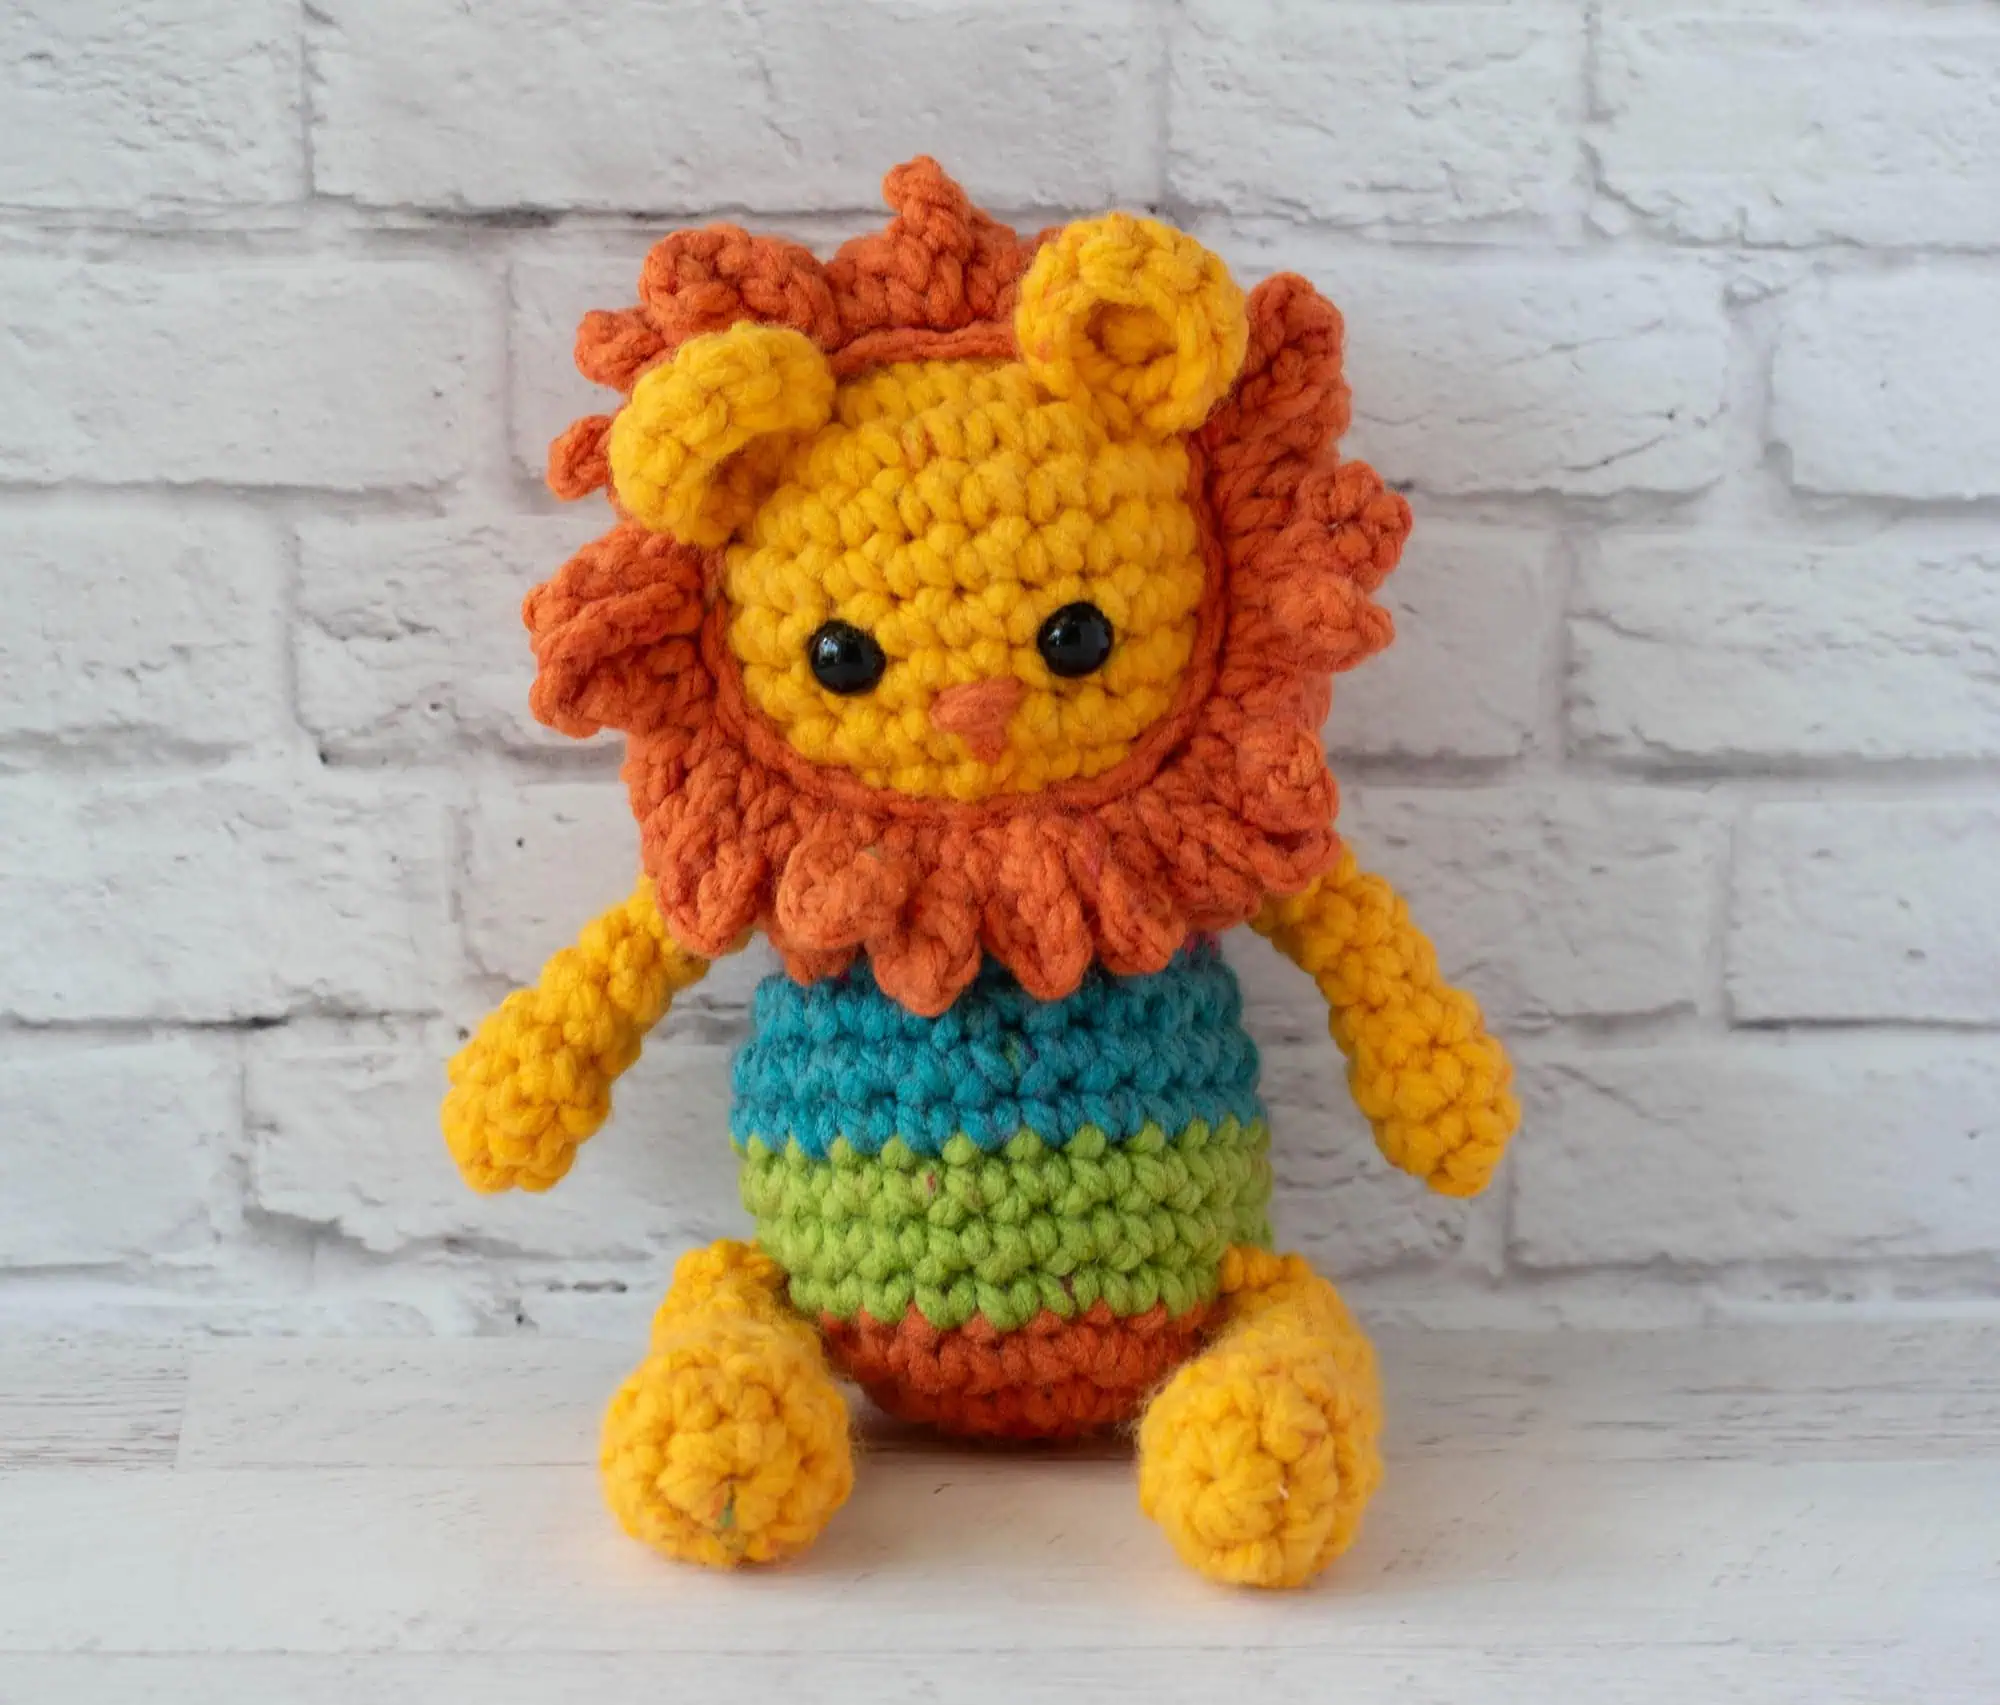 A yellow and orange rochet lion with a rainbow striped body